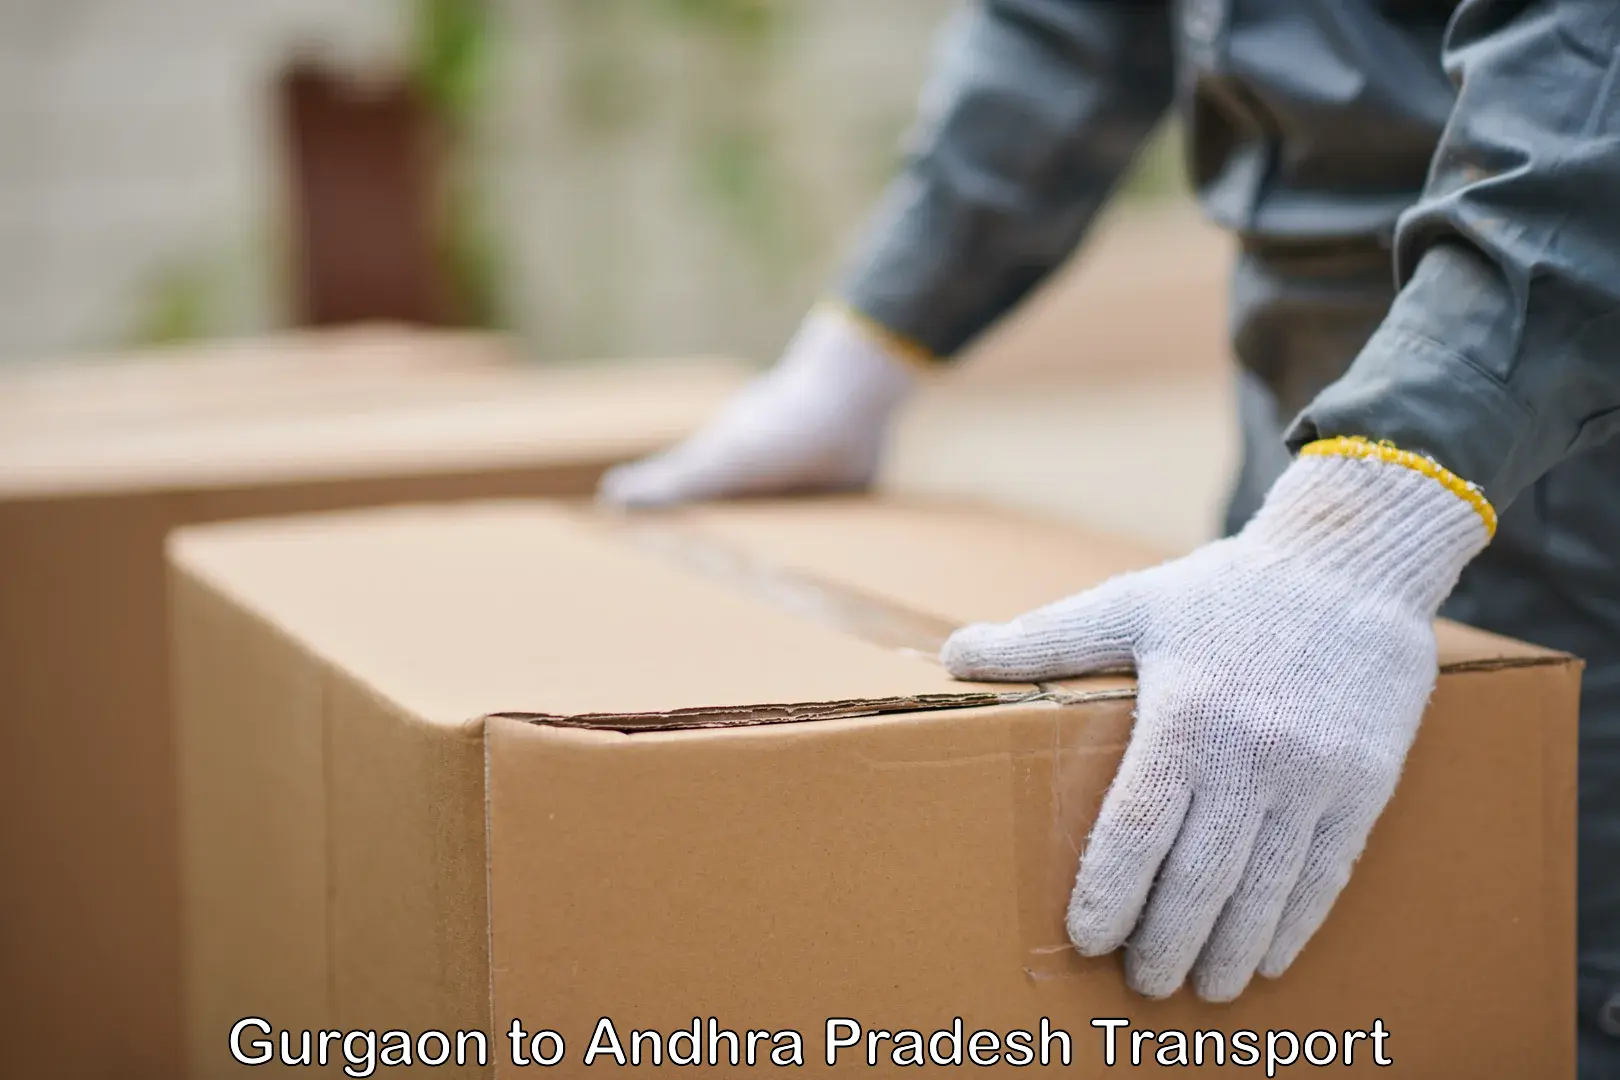 Daily parcel service transport in Gurgaon to Andhra Pradesh